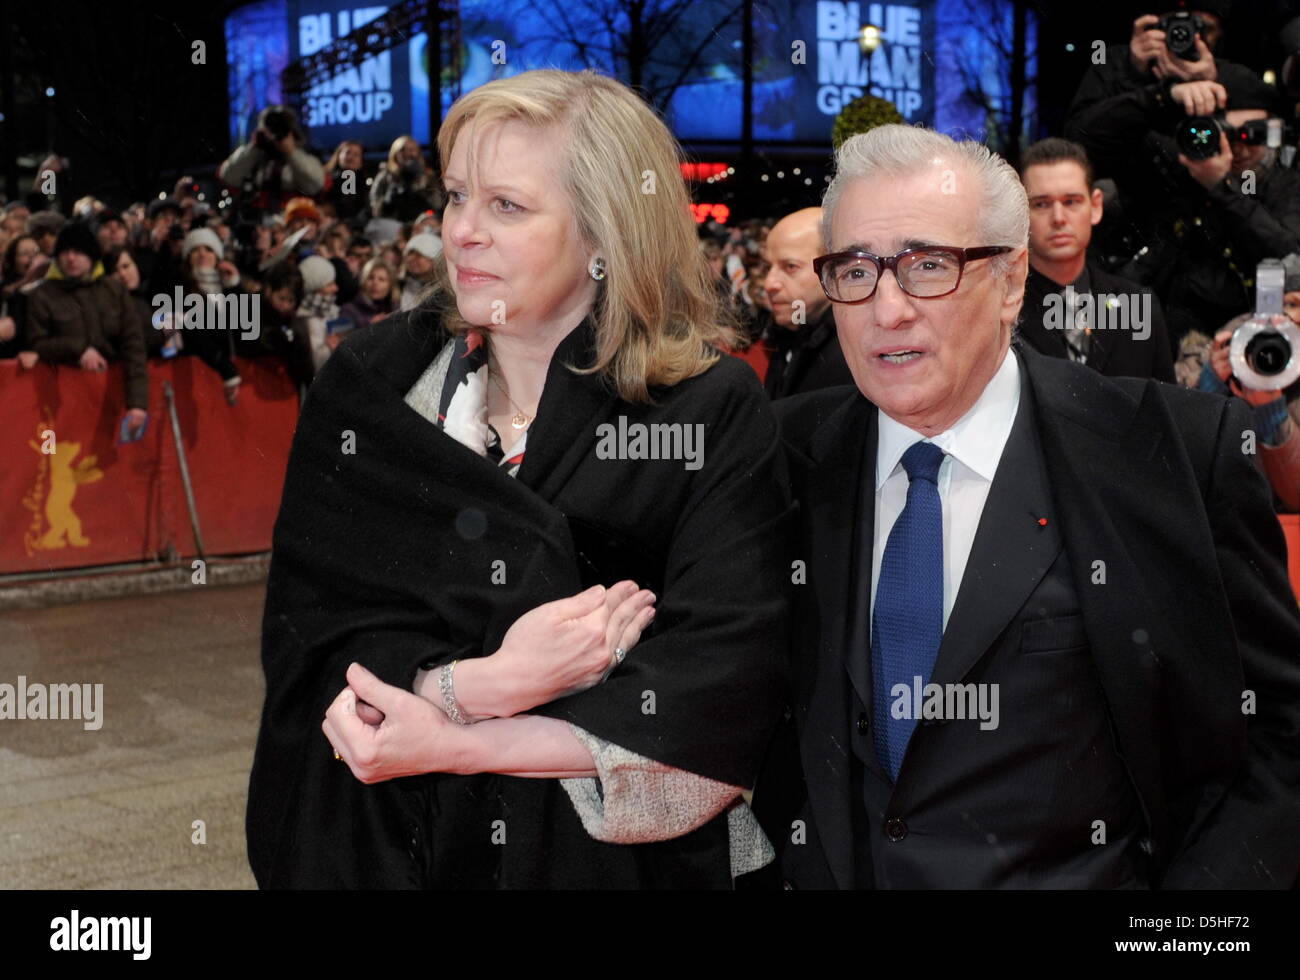 US director Martin Scorsese and his wife Helen Morris arrive for the premiere of the film 'Shutter Island', running in the festival, but not competing for the Golden Bear, during the 60th Berlinale International Film Festival in Berlin, Germany, on Saturday 13 February 2010. The festival runs until 21 Febuary 2010. Photo: Tim Brakemeier dpa/lbn Stock Photo